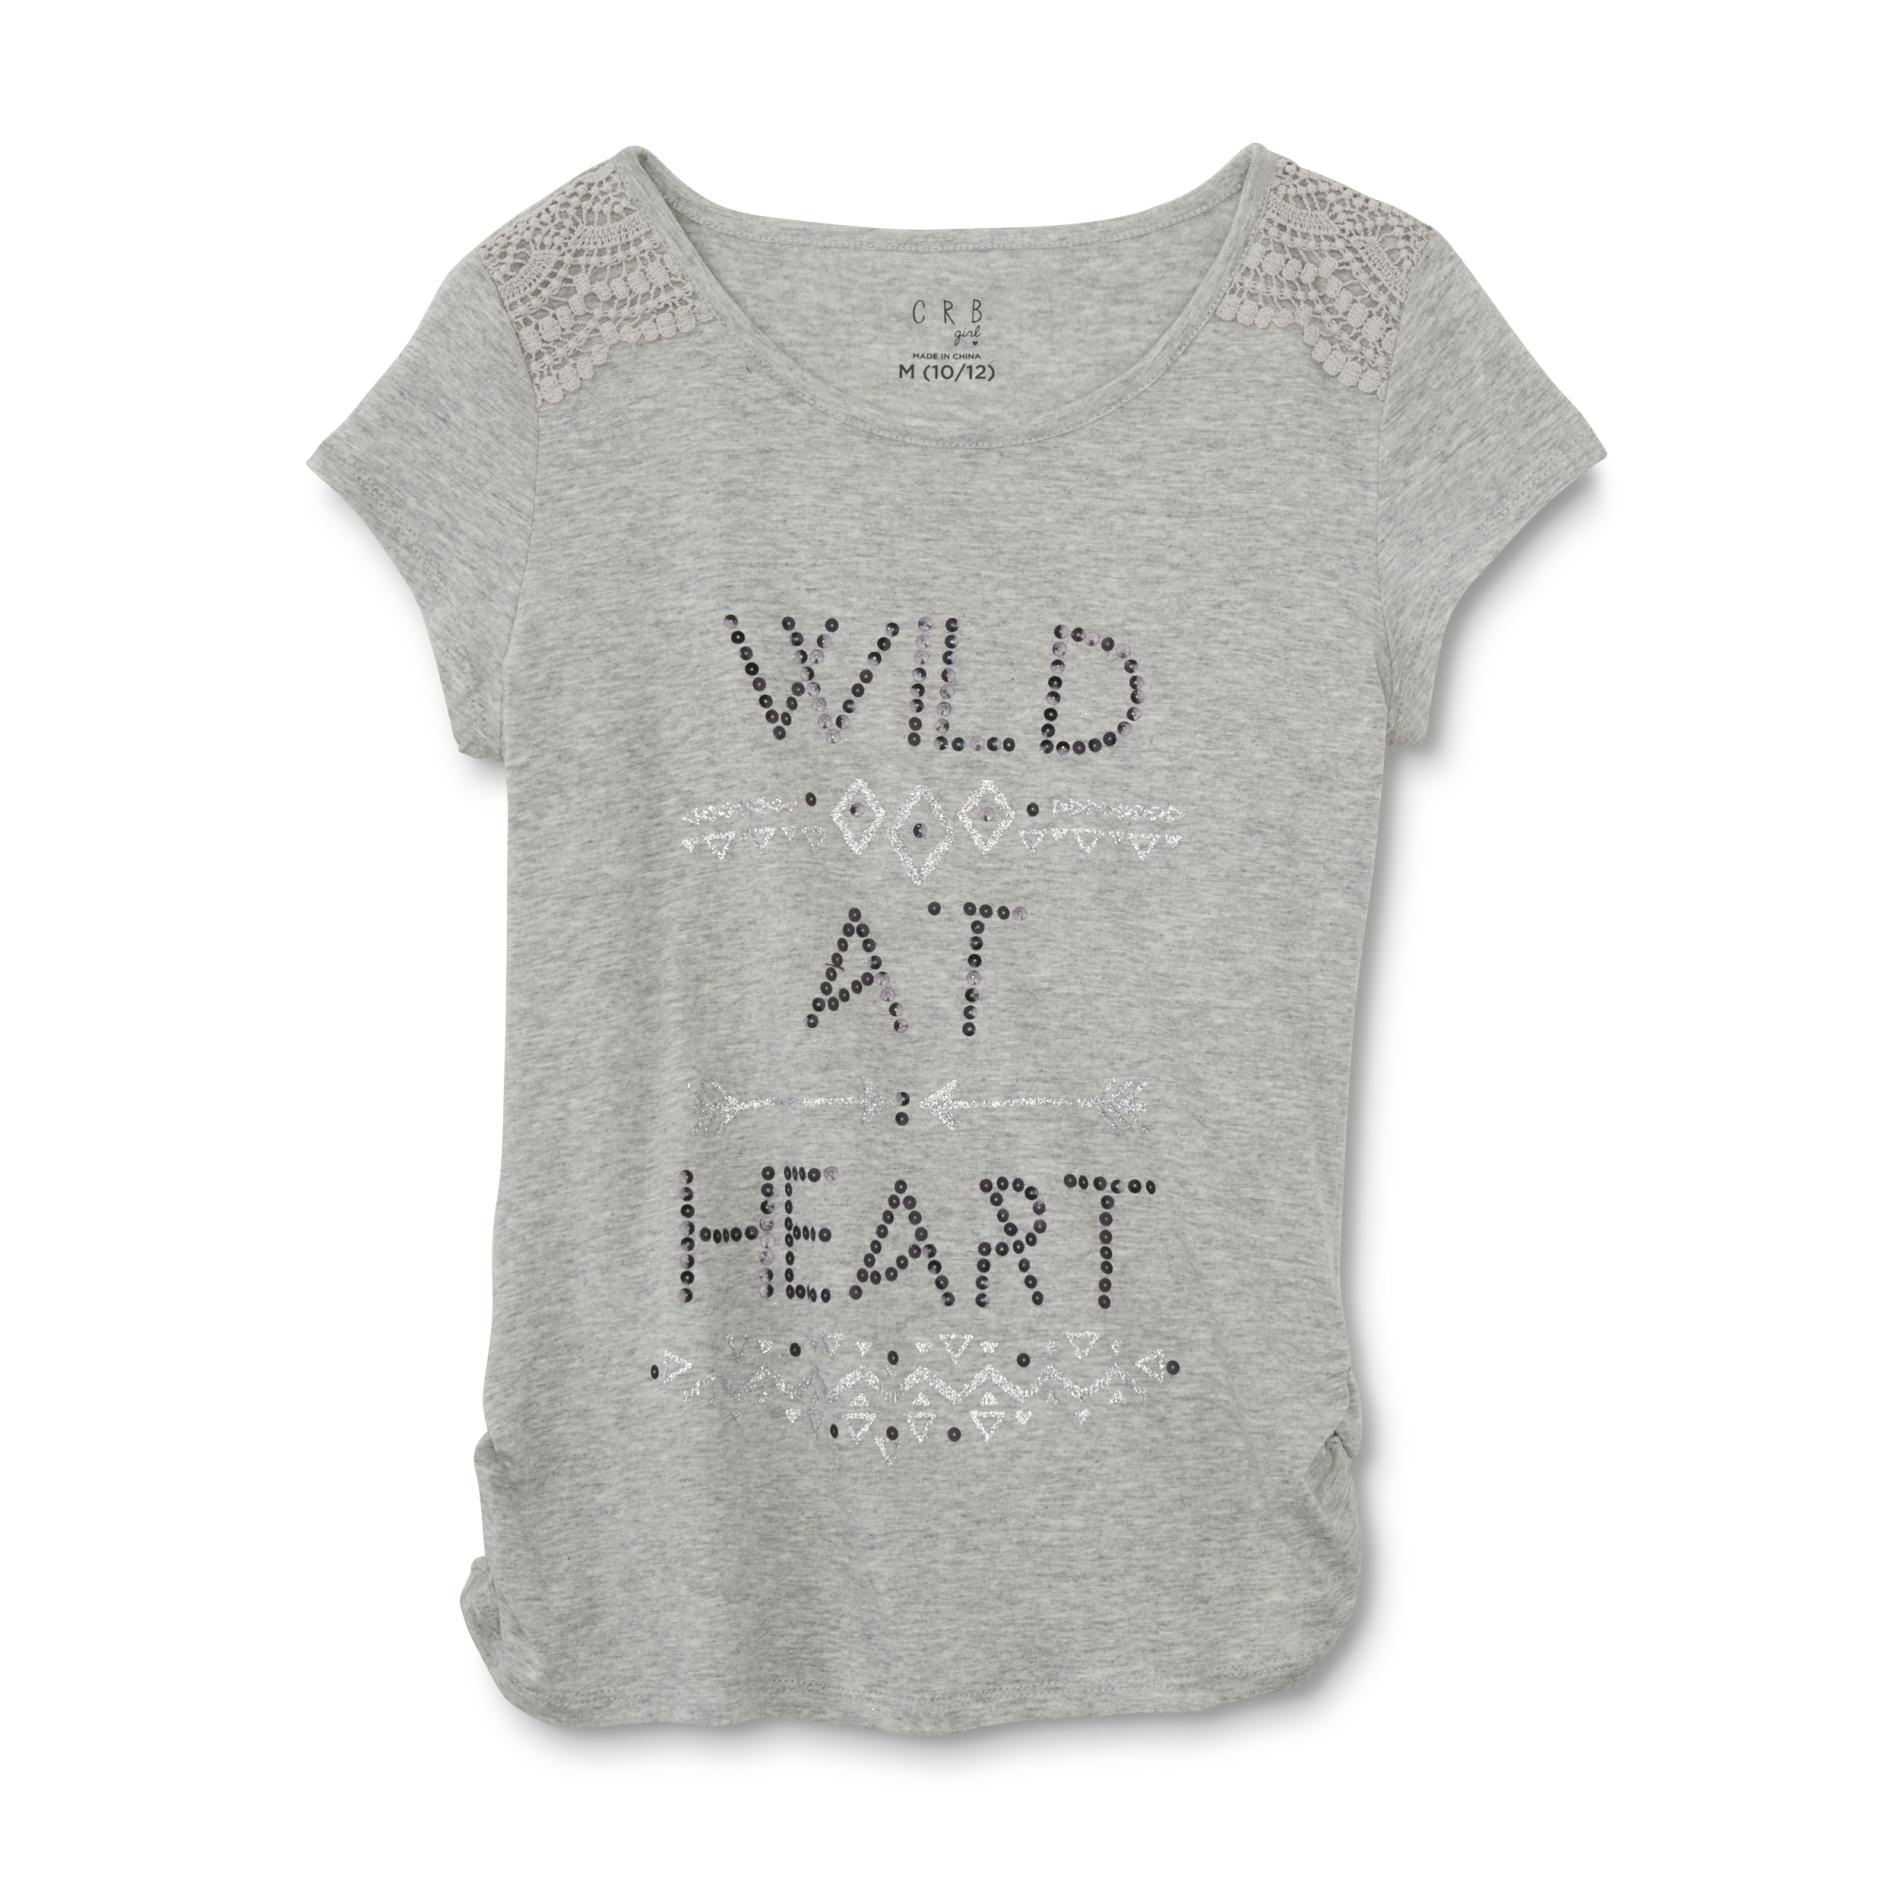 Canyon River Blues Girl's Graphic T-Shirt - Wild at Heart